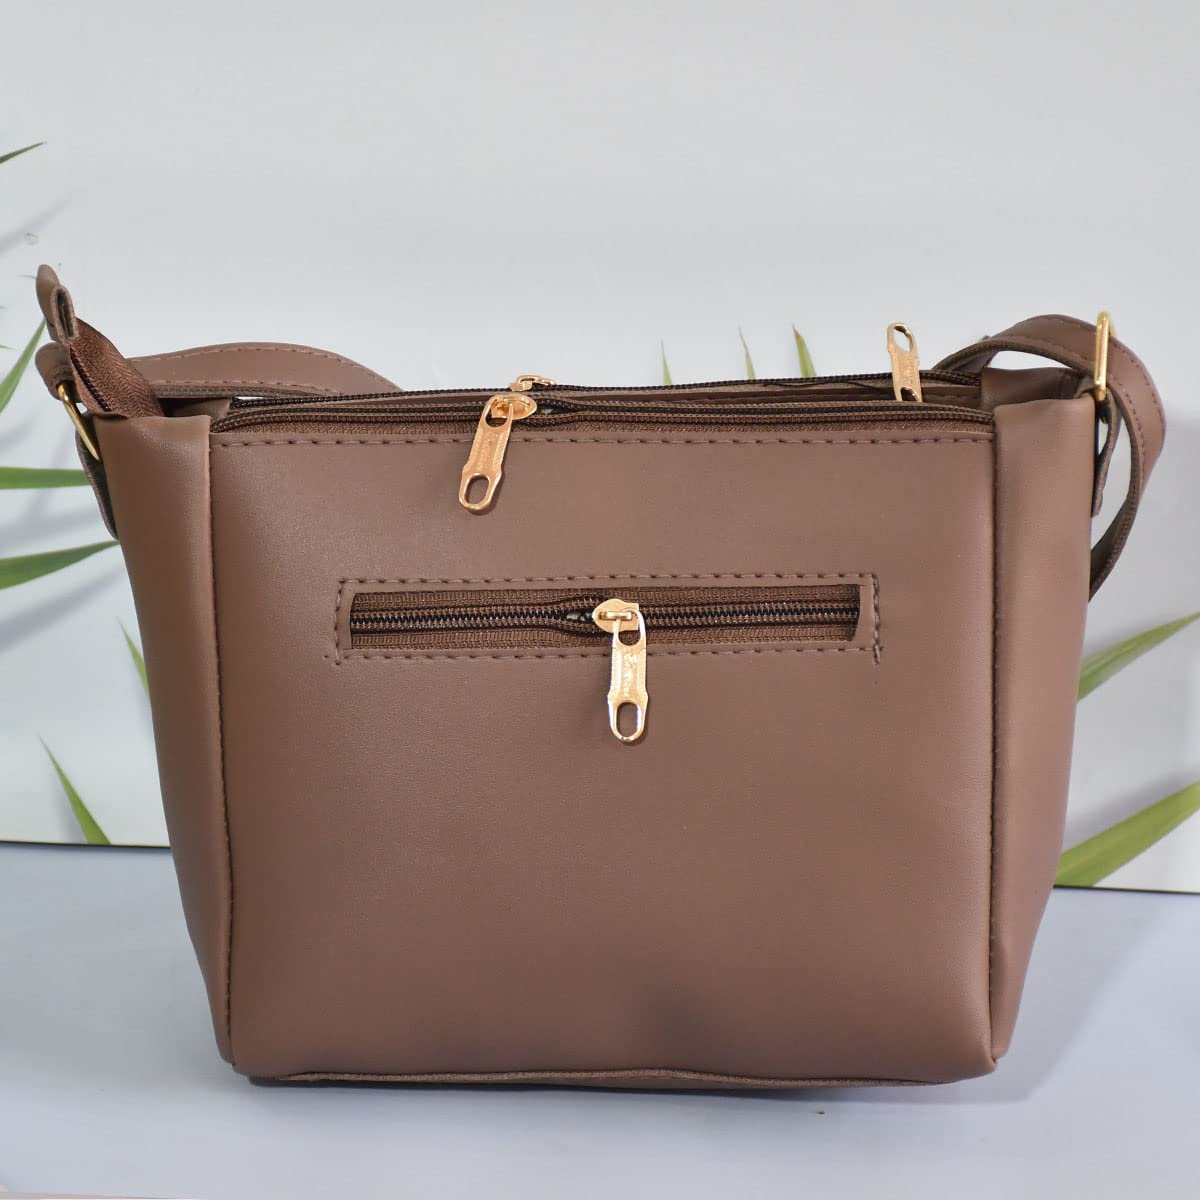 fcity.in - Gorgeous Stylish Faux Leather Handbag Attractive And Classic In